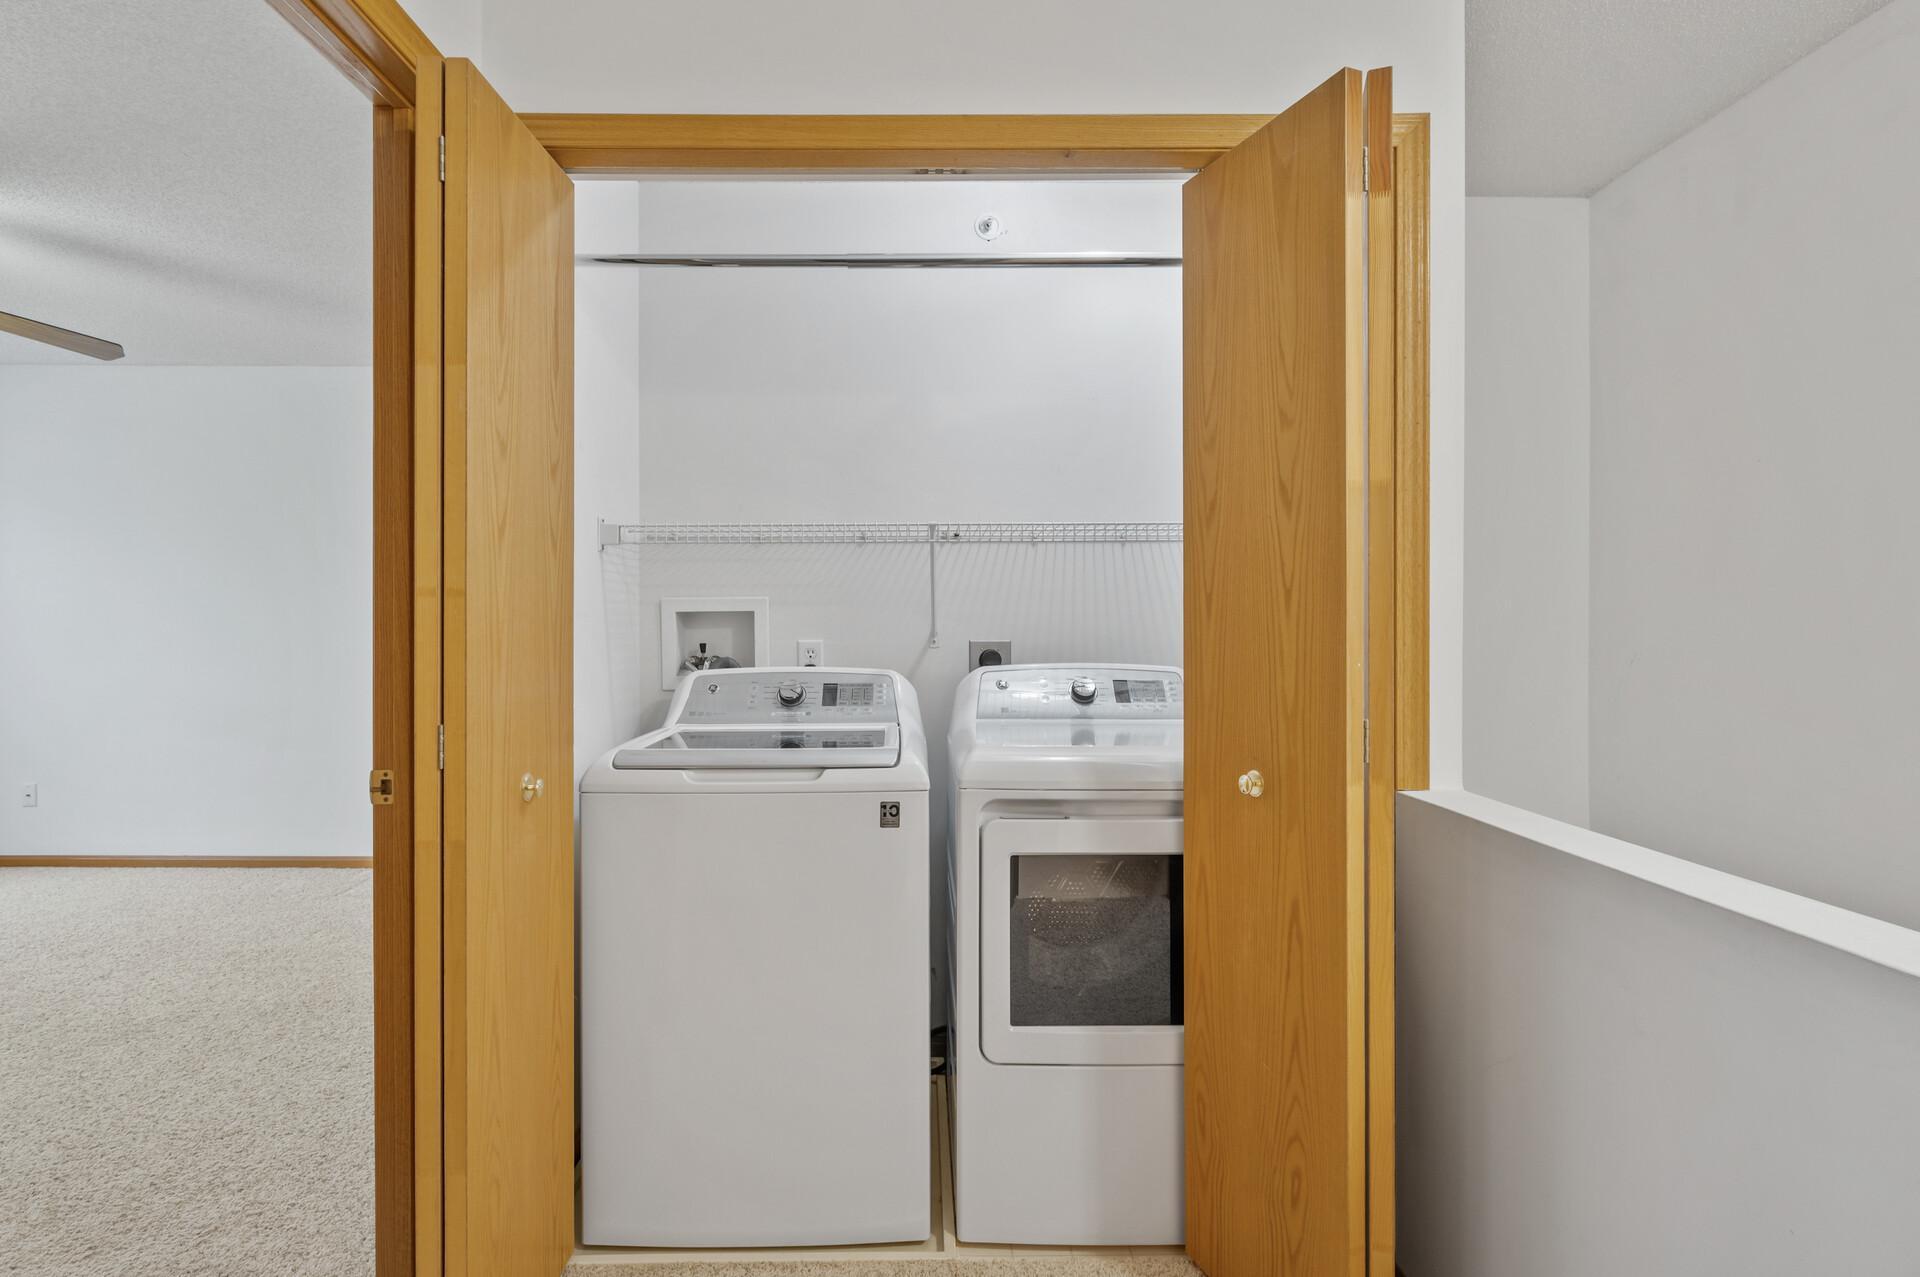 Upper level laundry facilities. Washer and dryer sold with this unit